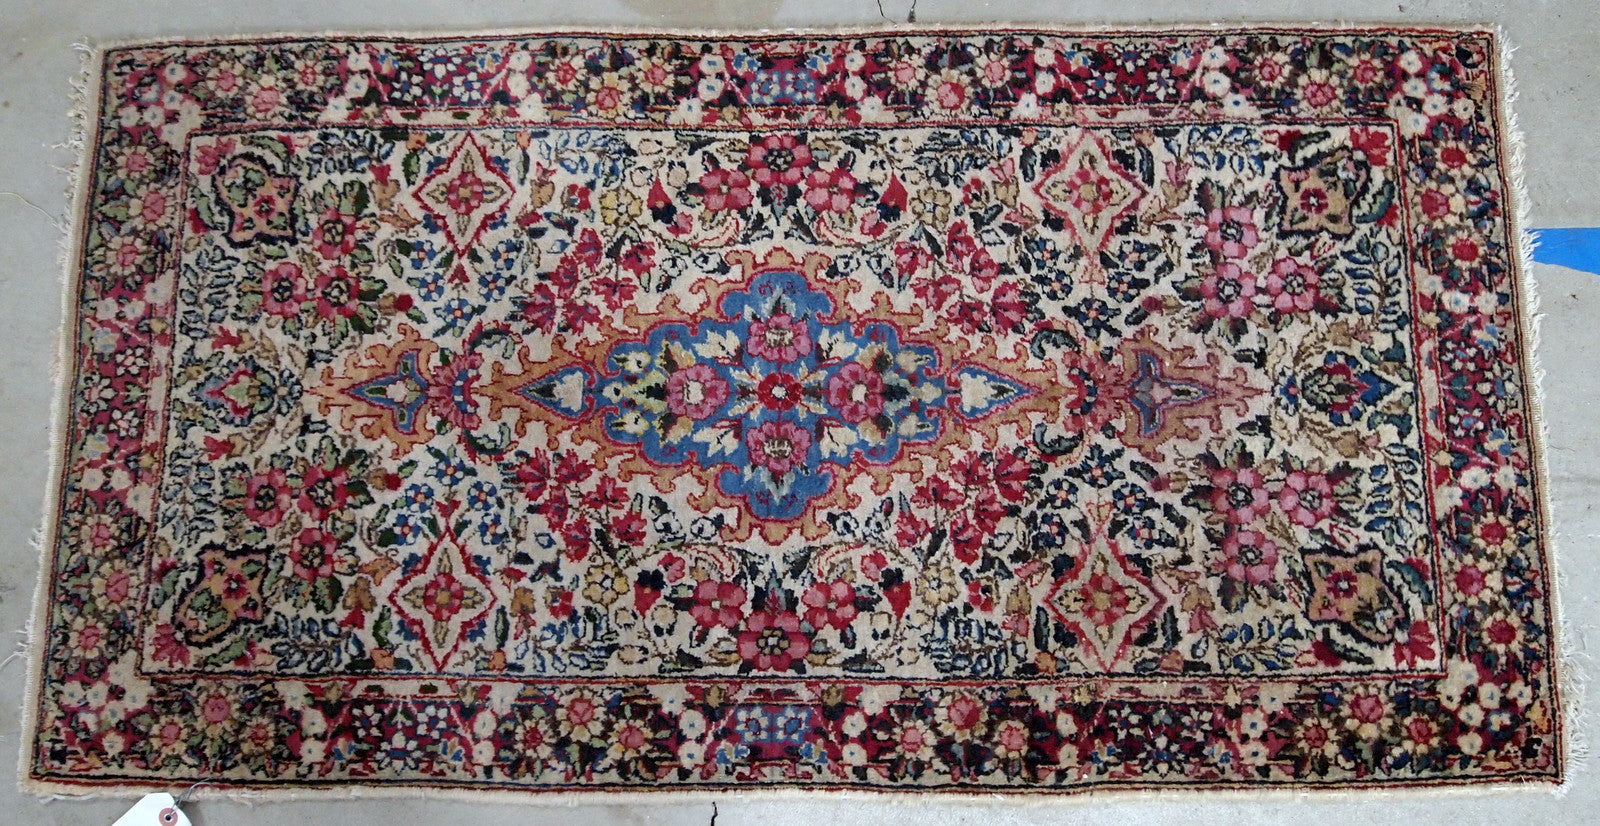 Antique handmade Persian Kerman rug in colorful shades. It is from the beginning of 20th century in original good condition.